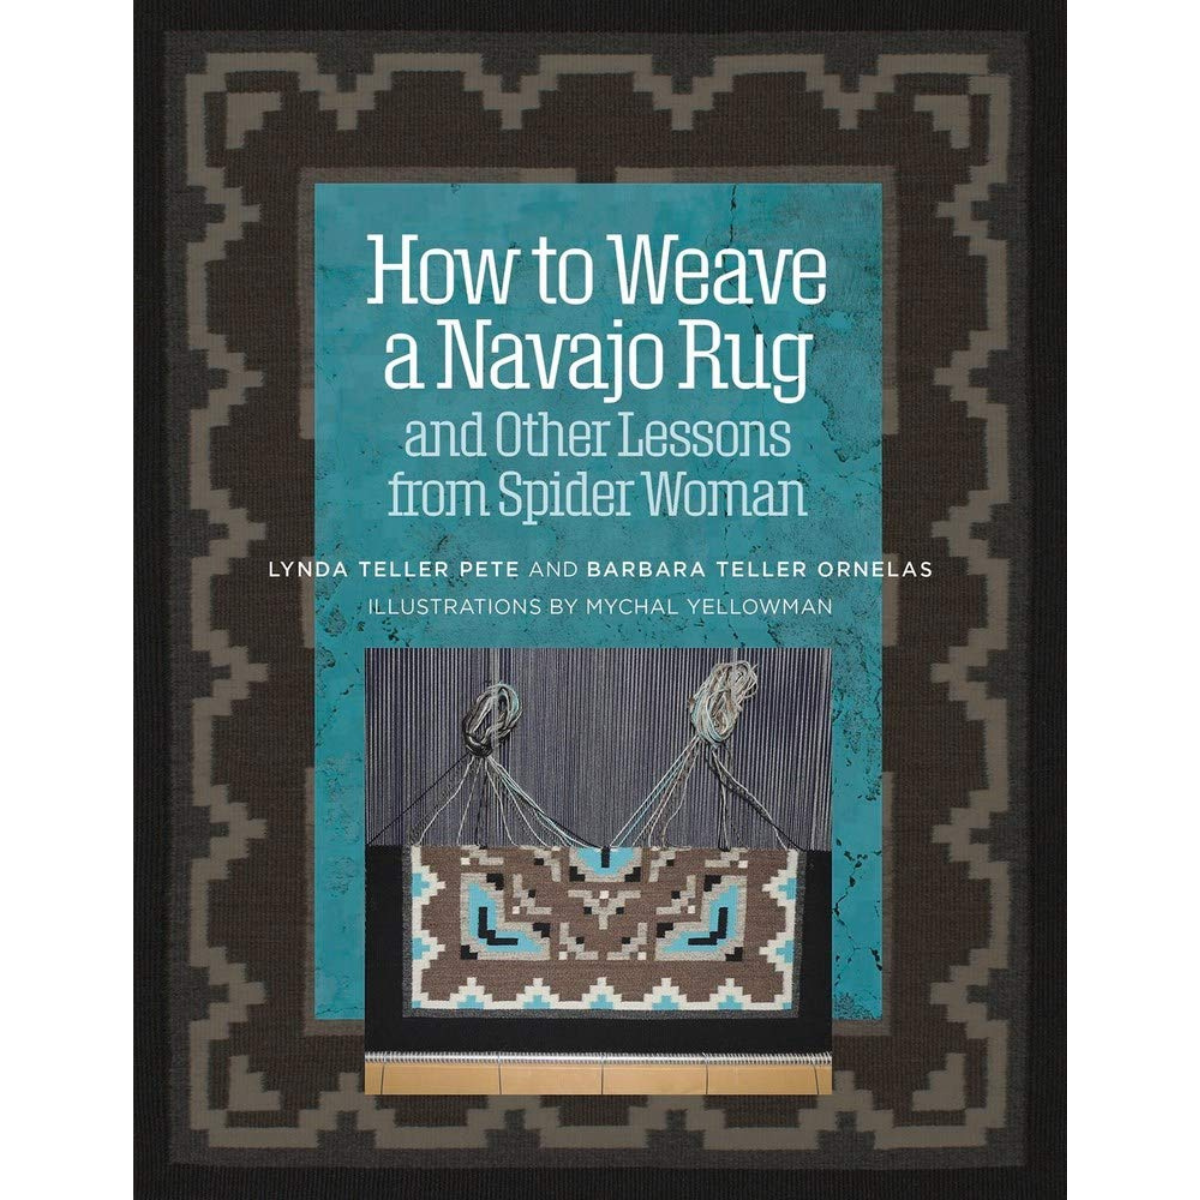 How to Weave a Navajo Rug and Other Lessons from Spider Woman